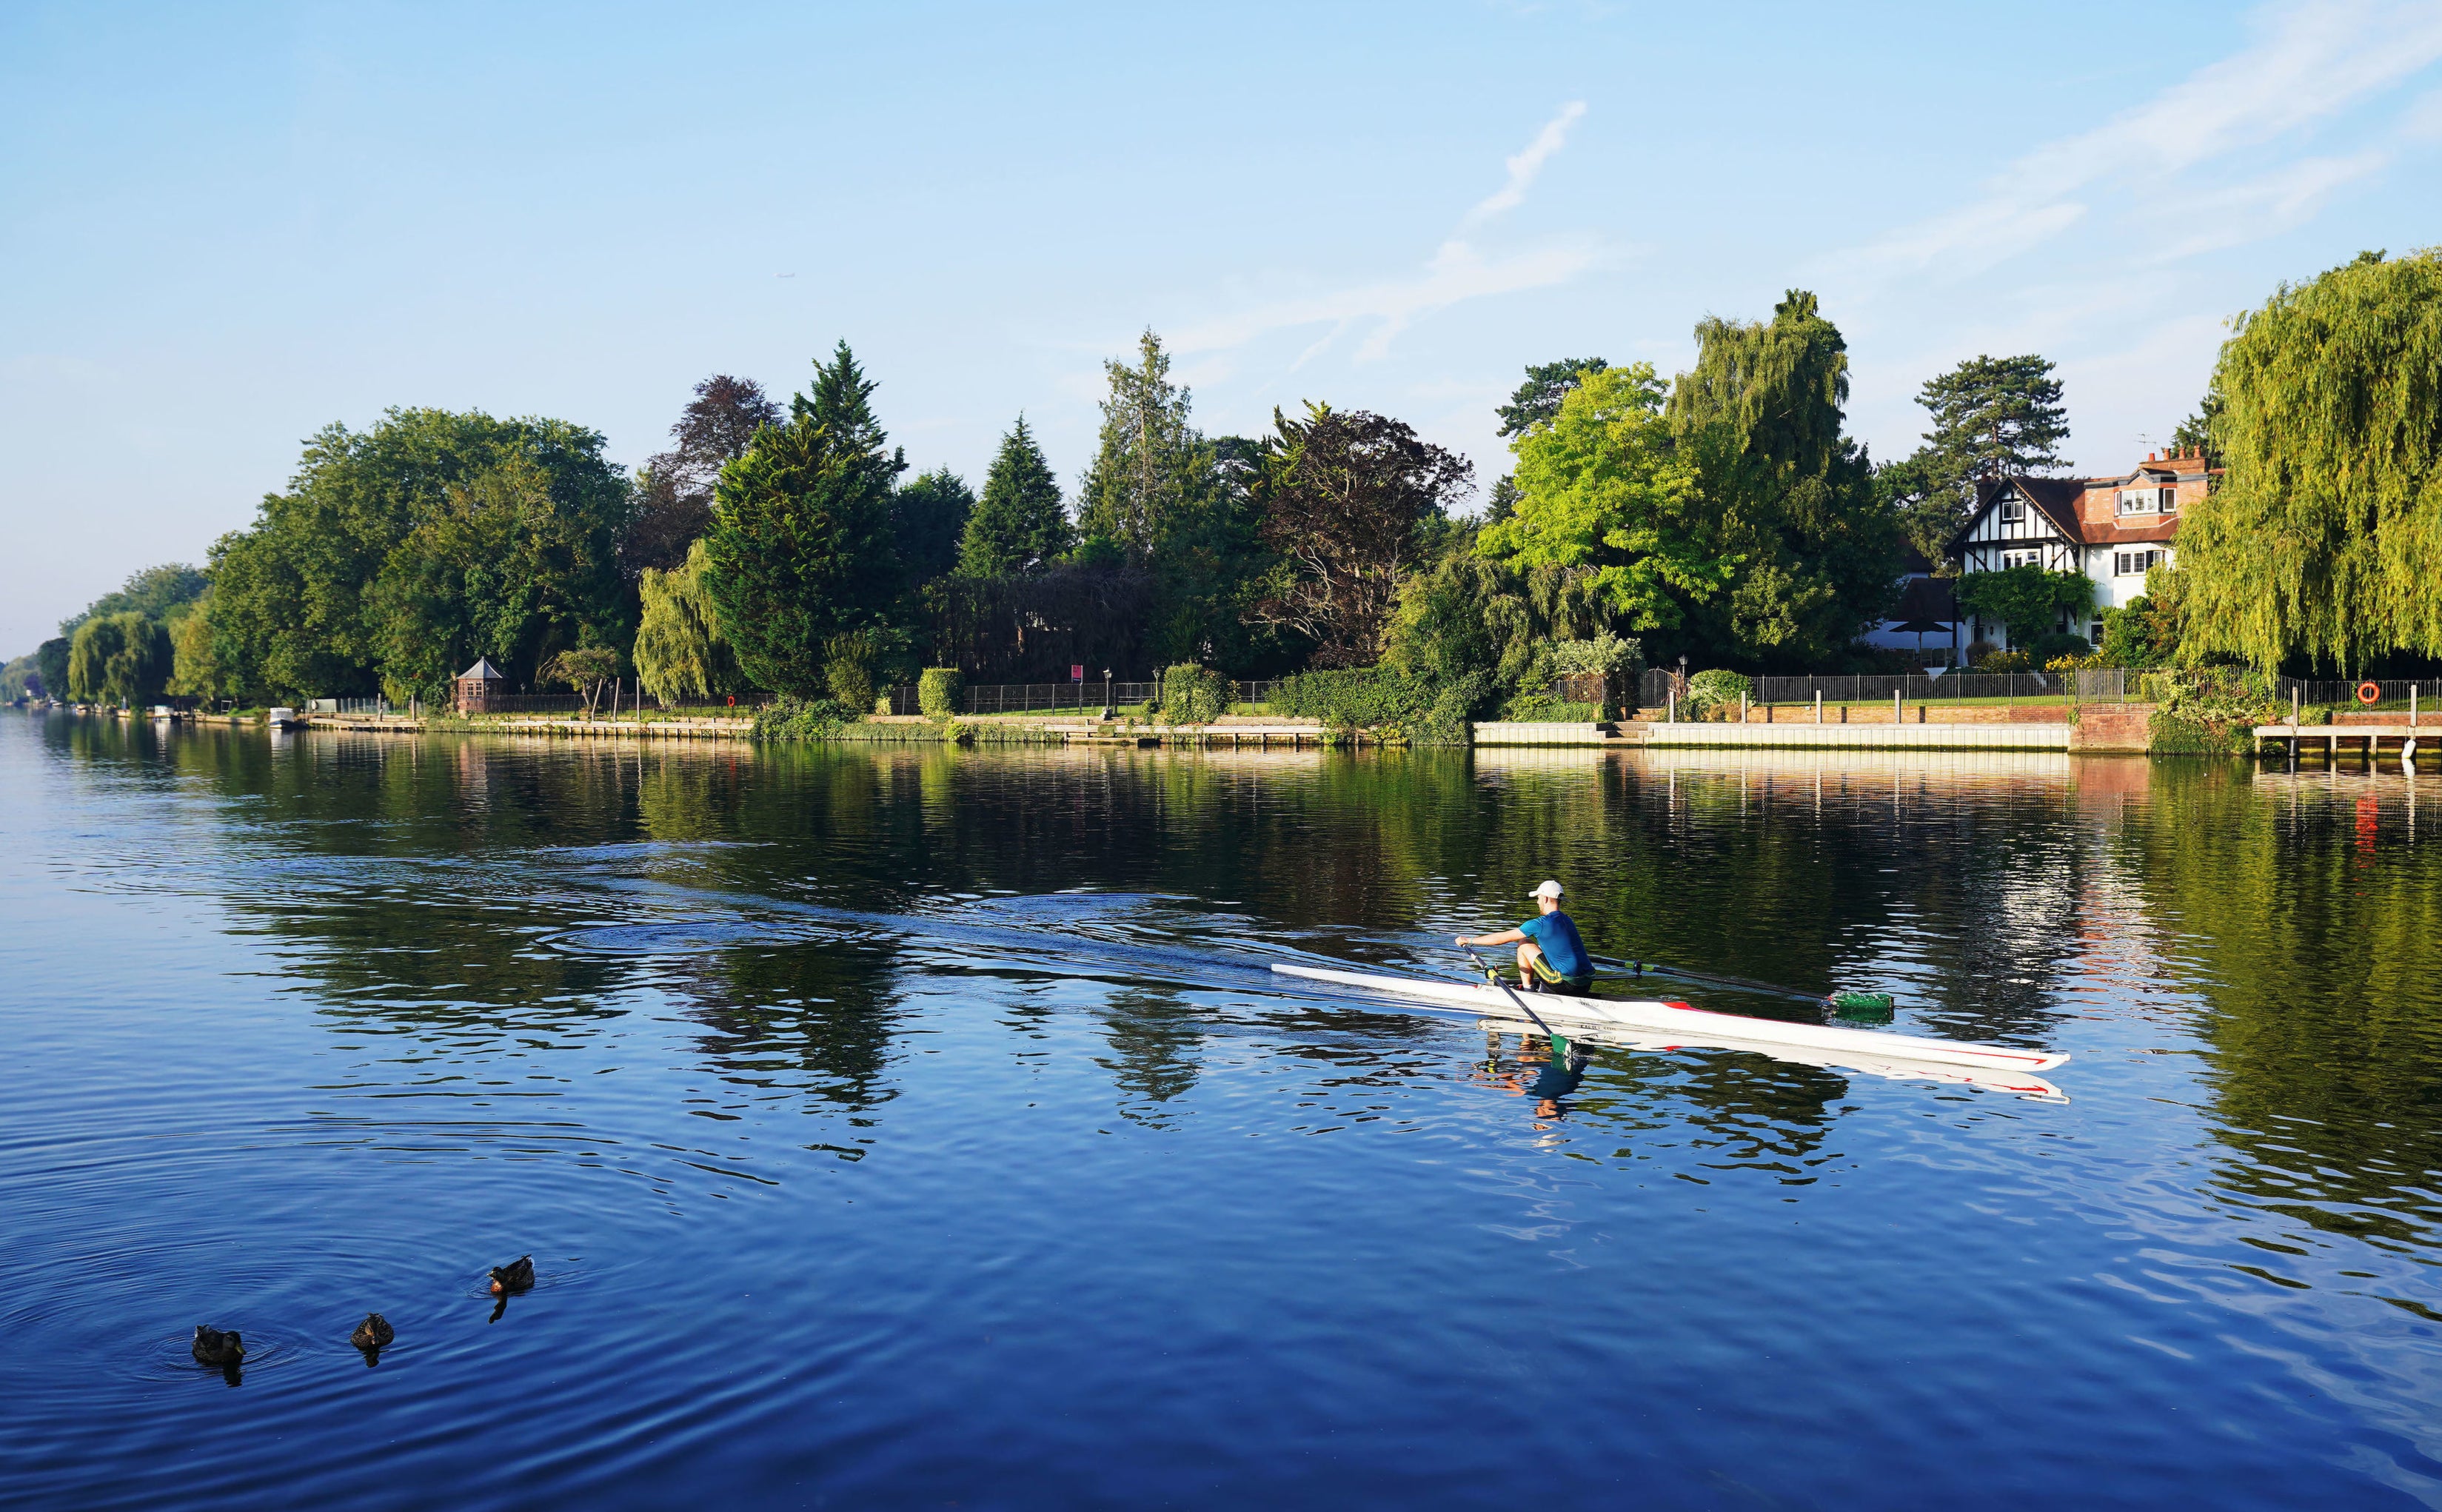 The race marks a tradition dating back to the 19th century which sees participants swim a 5km, 2.8km or 1.4km, stretch of the River Thames in Maidenhead